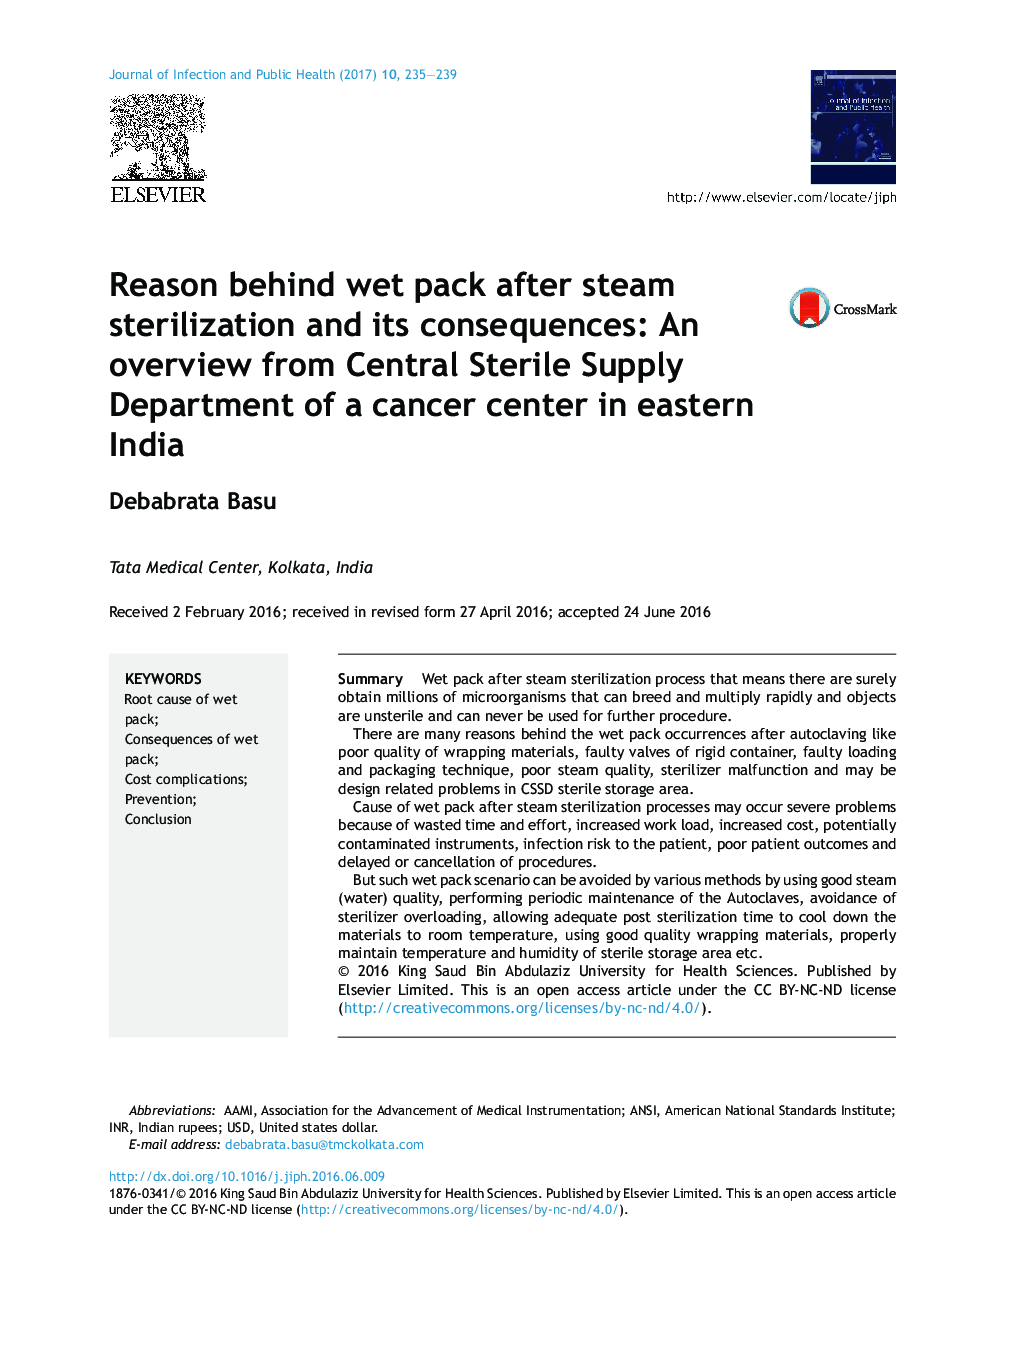 Reason behind wet pack after steam sterilization and its consequences: An overview from Central Sterile Supply Department of a cancer center in eastern India